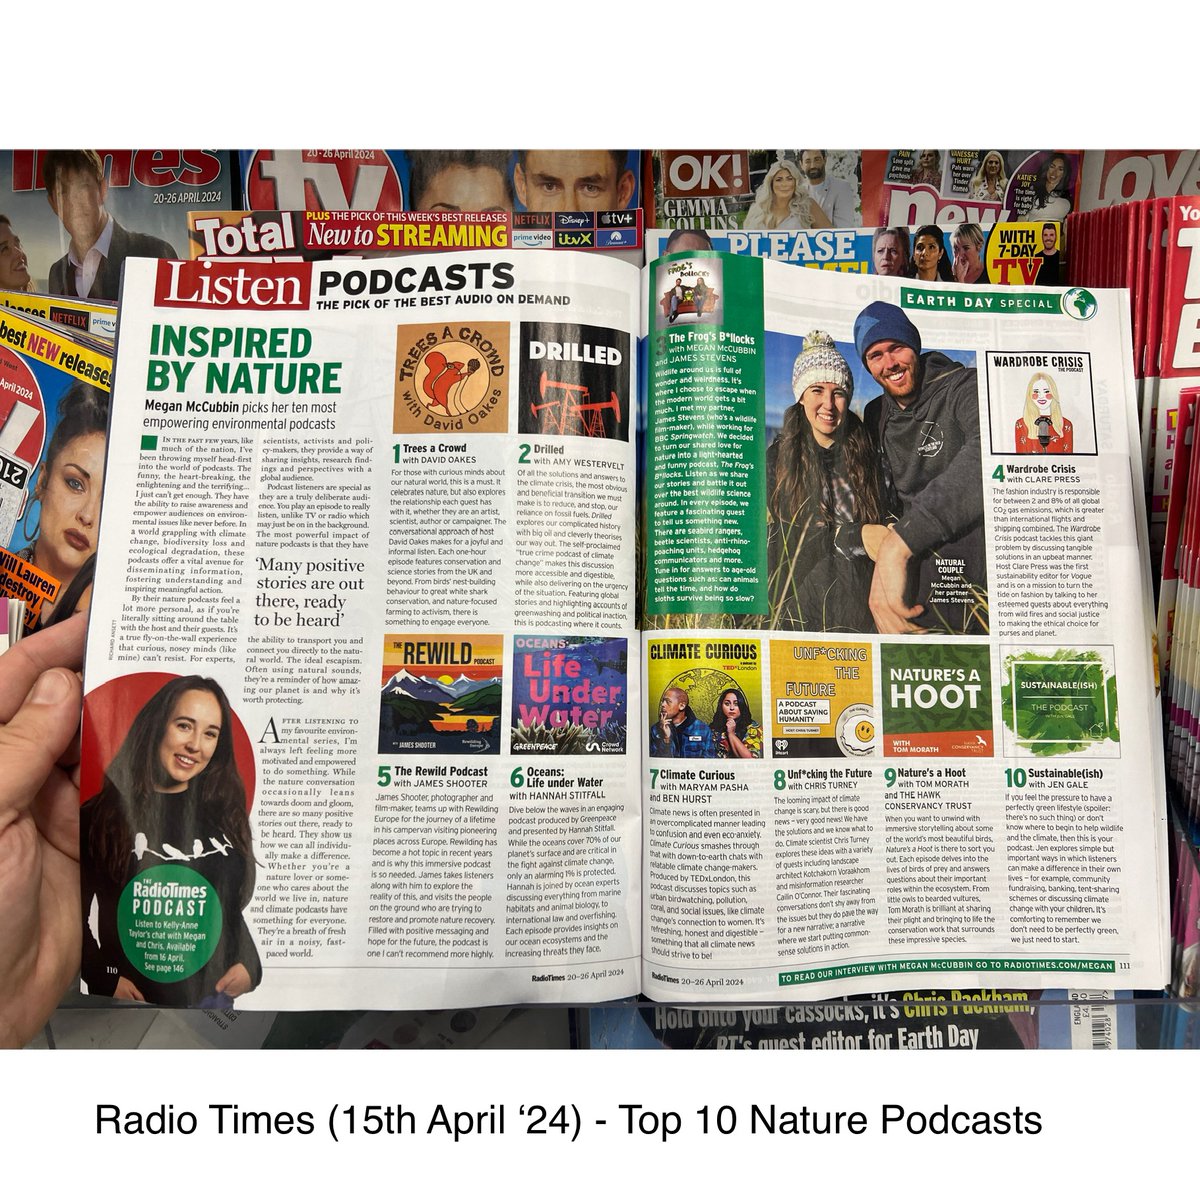 Oh - and we made this week's @RadioTimes too...! Sitting there surrounded by impeccable company. (Thanks @MeganMcCubbin!)